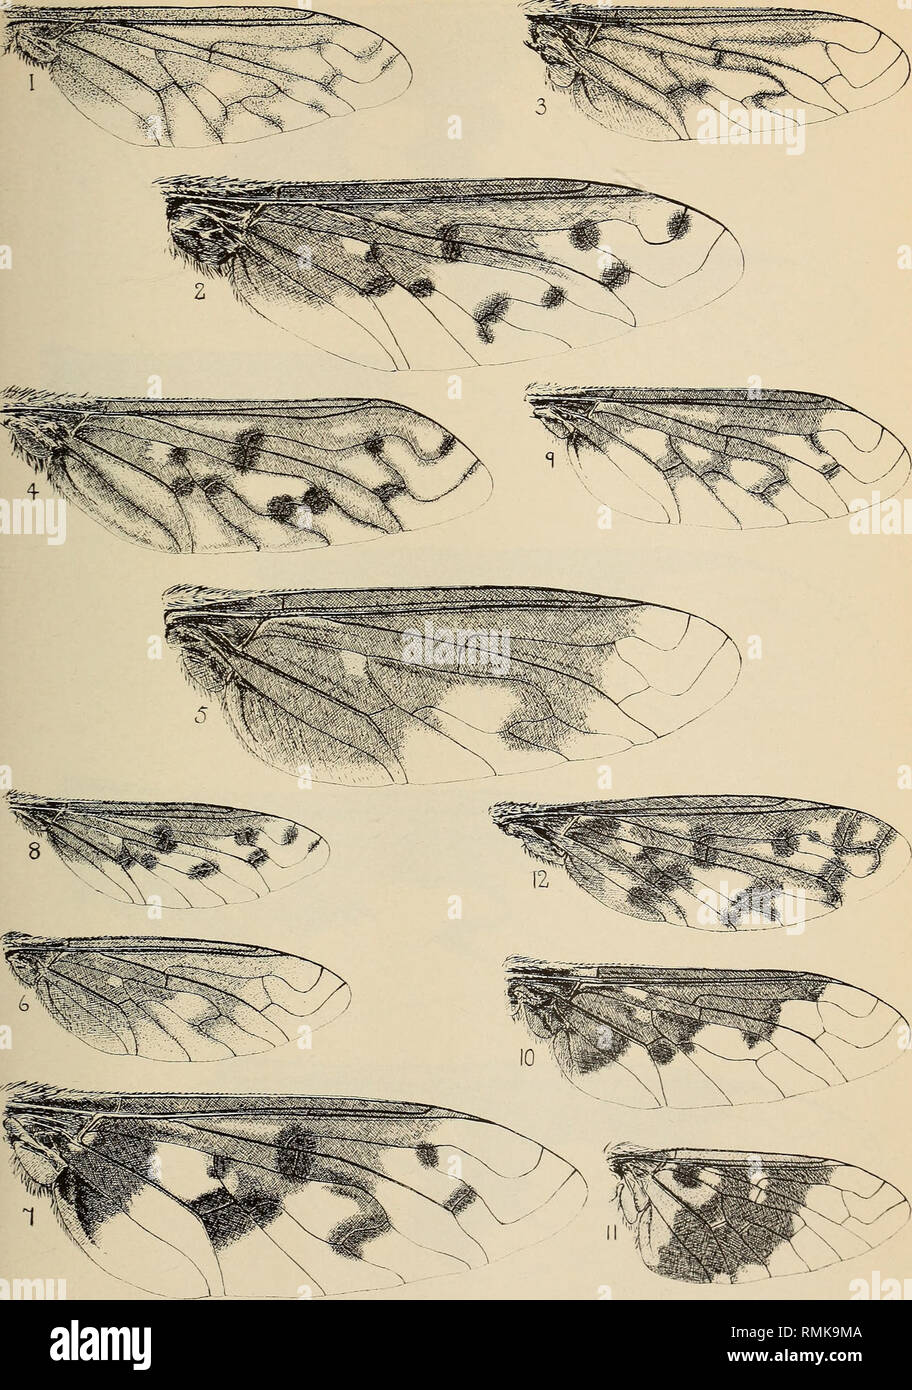 . Annals of the South African Museum = Annale van die Suid-Afrikaanse Museum. Natural history. Ann. S. Air. Mus., Vol. XXXV Plate II. Wings of South African species of Exoprosopa i—Exoprosopa hamula n. sp. (2). 2 —Exoprosopa aridicola n. sp. (2). 3 — Exoprosopa acrodiscoides Bezz. (2). 4—Exoprosopa guillarmodi n. sp. (&lt;J). 5 — Exoprosopa hamata (Macq.) (2). 6 — Exoprosopa nebulosa n. sp. (2). 7 — Exoprosopa inaequalipes Lw. (cJ) (infuscation at base of fourth posterior cell sometimes extends down fifth vein). 8 — Exoprosopa loxospila n. sp. (2). 9 — Exoprosopa triloculina n. sp. {$). 10 — E Stock Photo